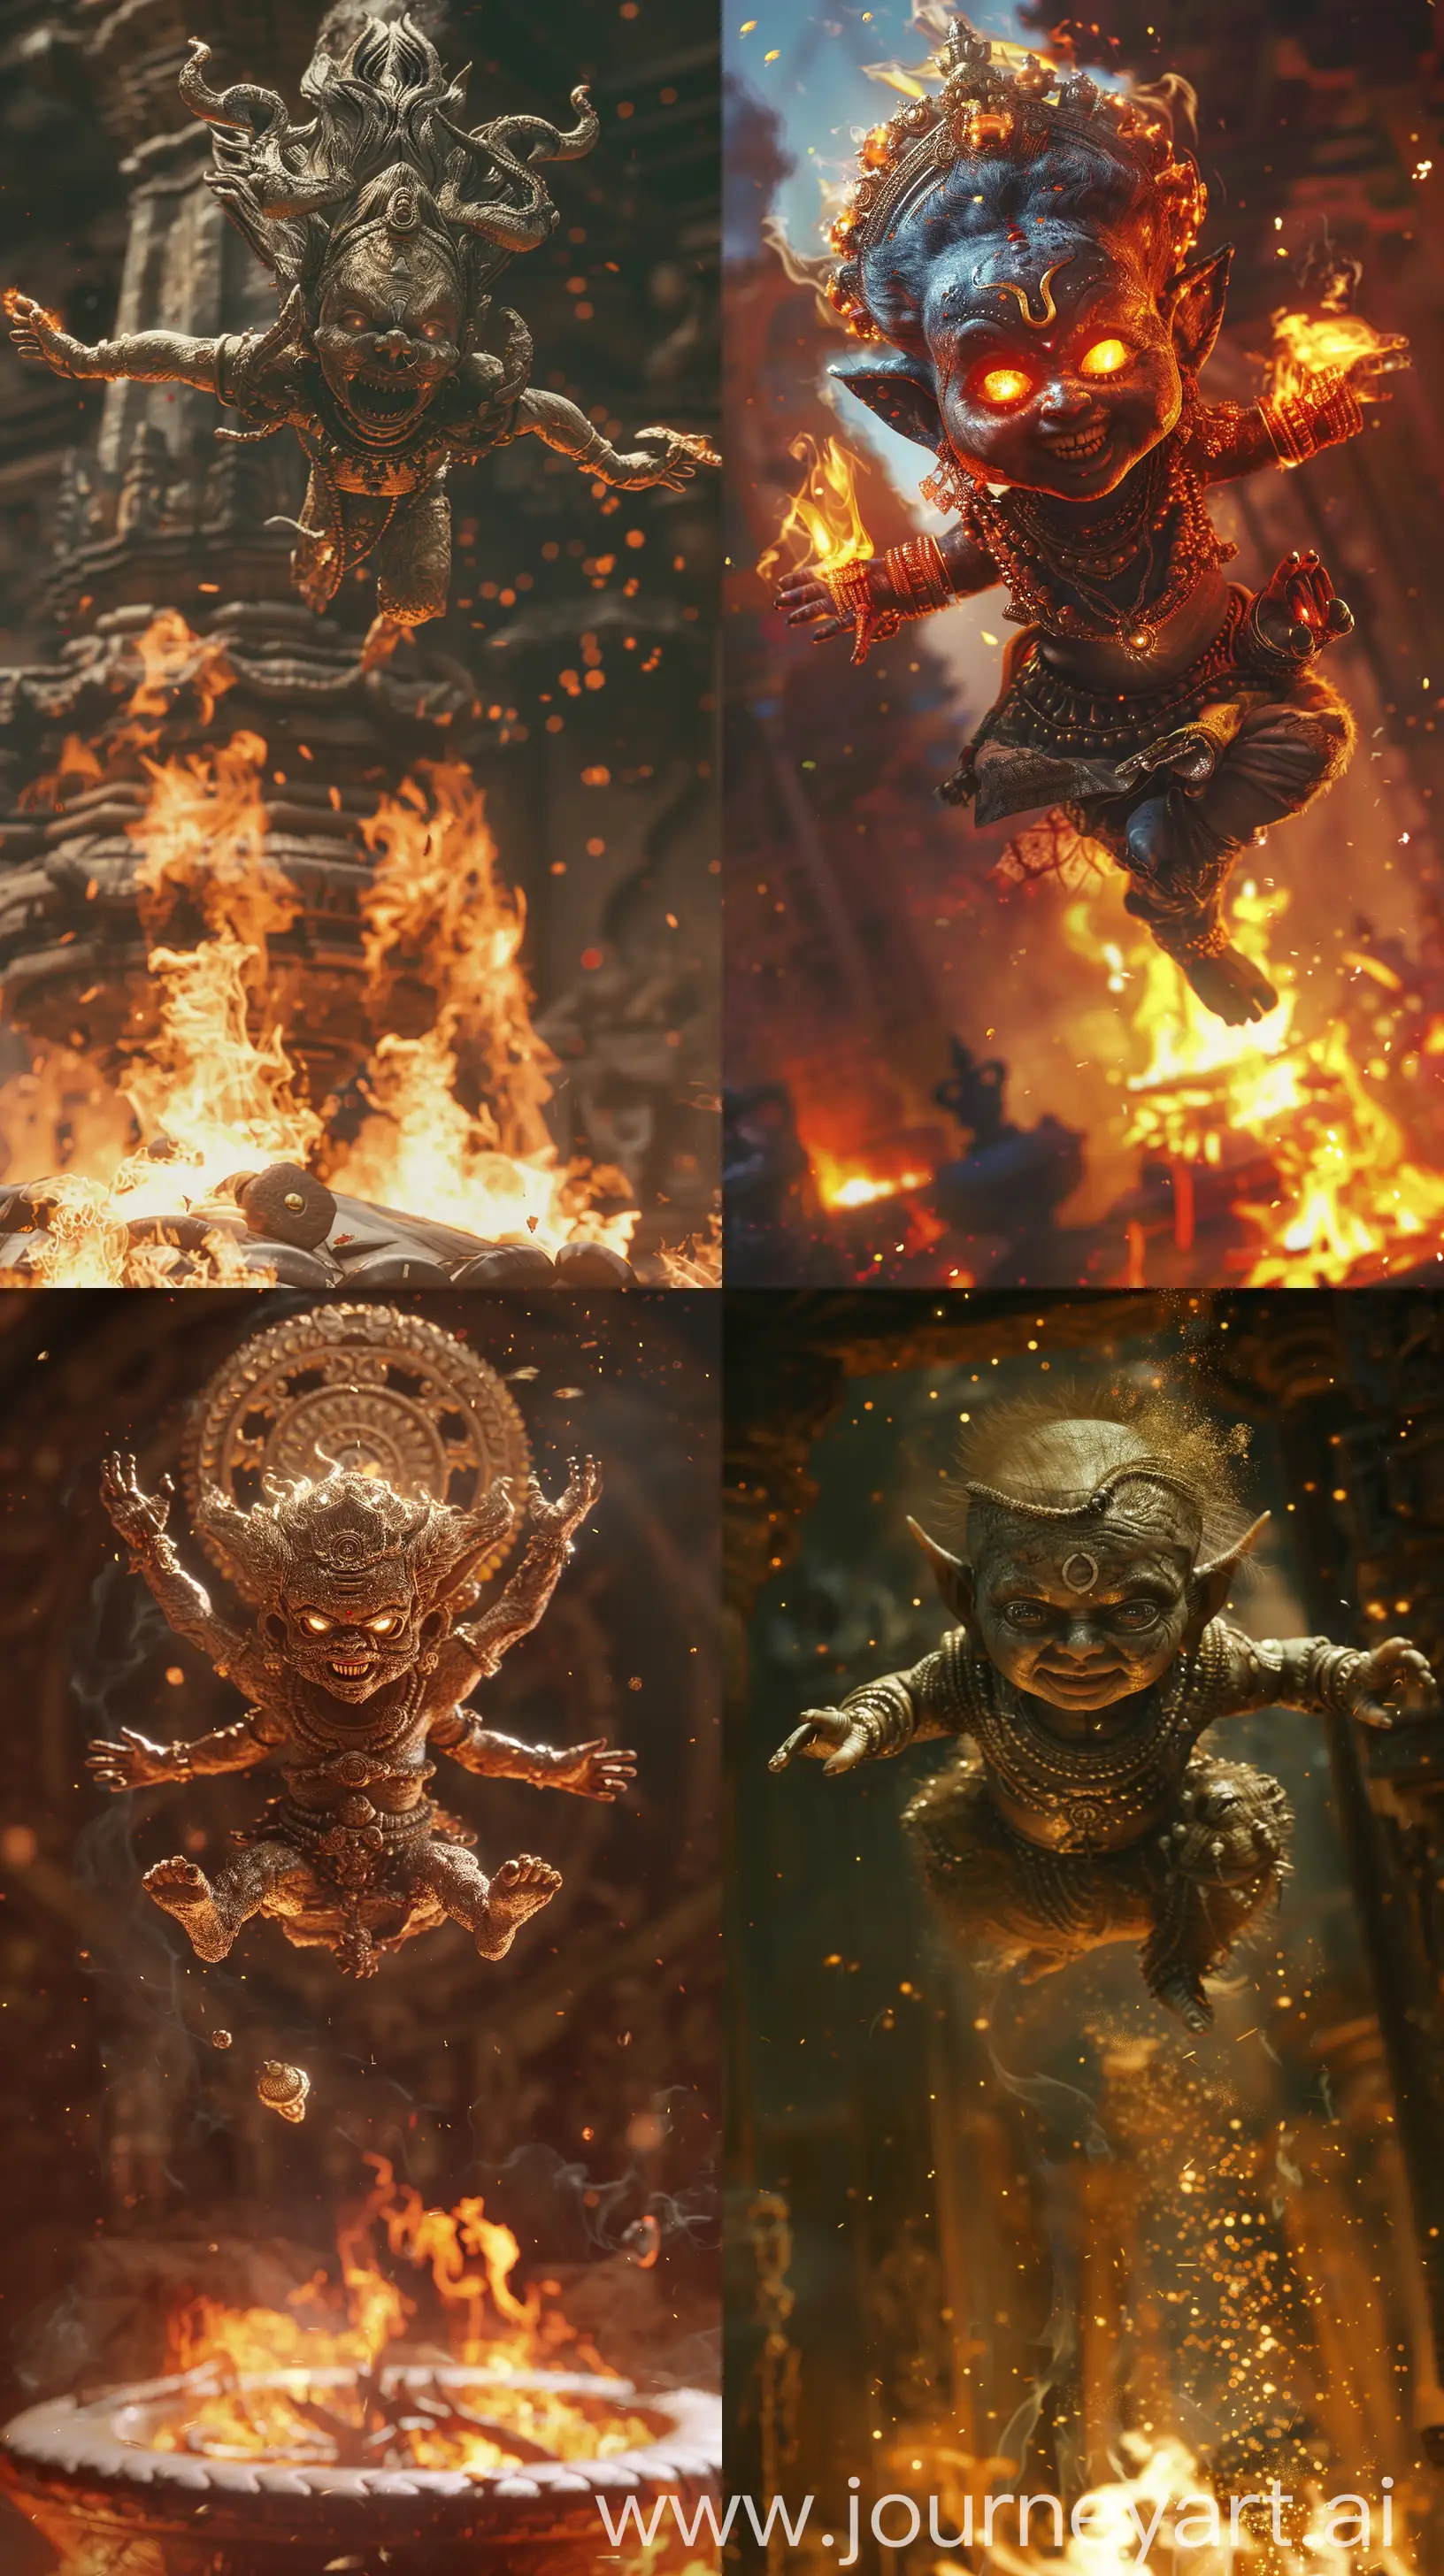 Ancient-Indian-Newborn-Demon-Hovering-Over-Funeral-Pyre